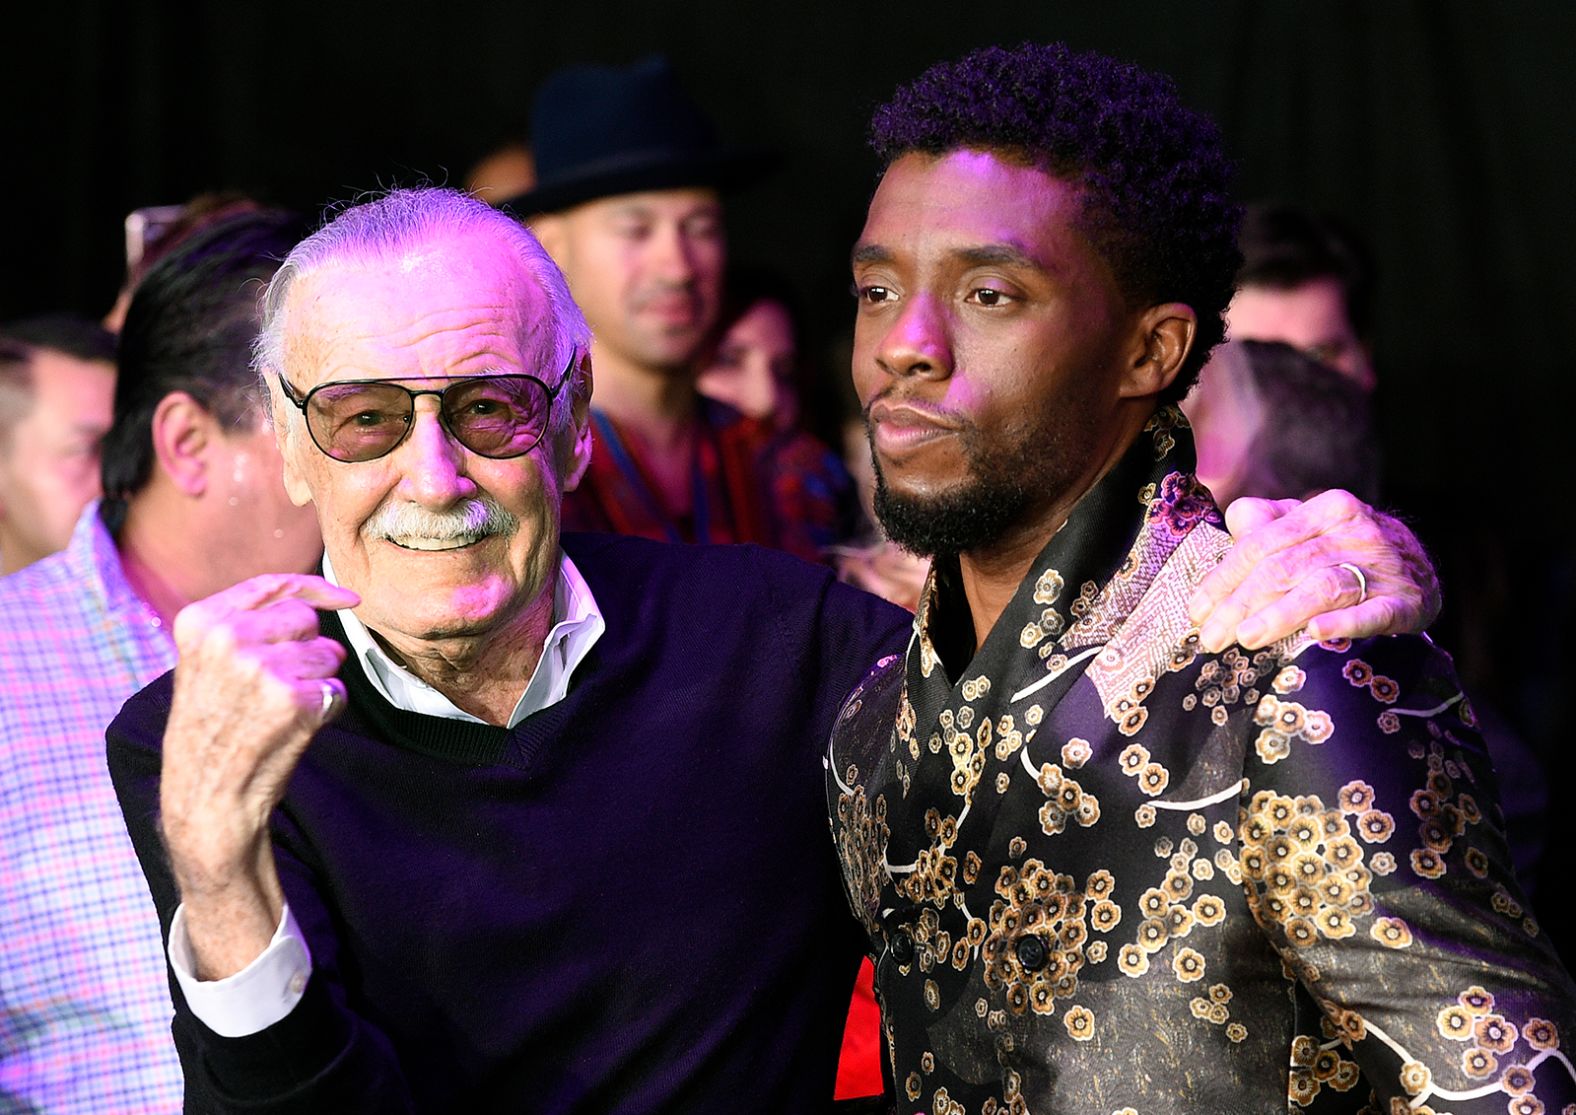 Boseman poses with comic book author Stan Lee, who co-created many of the Marvel superheroes that have come to life on the big screen.